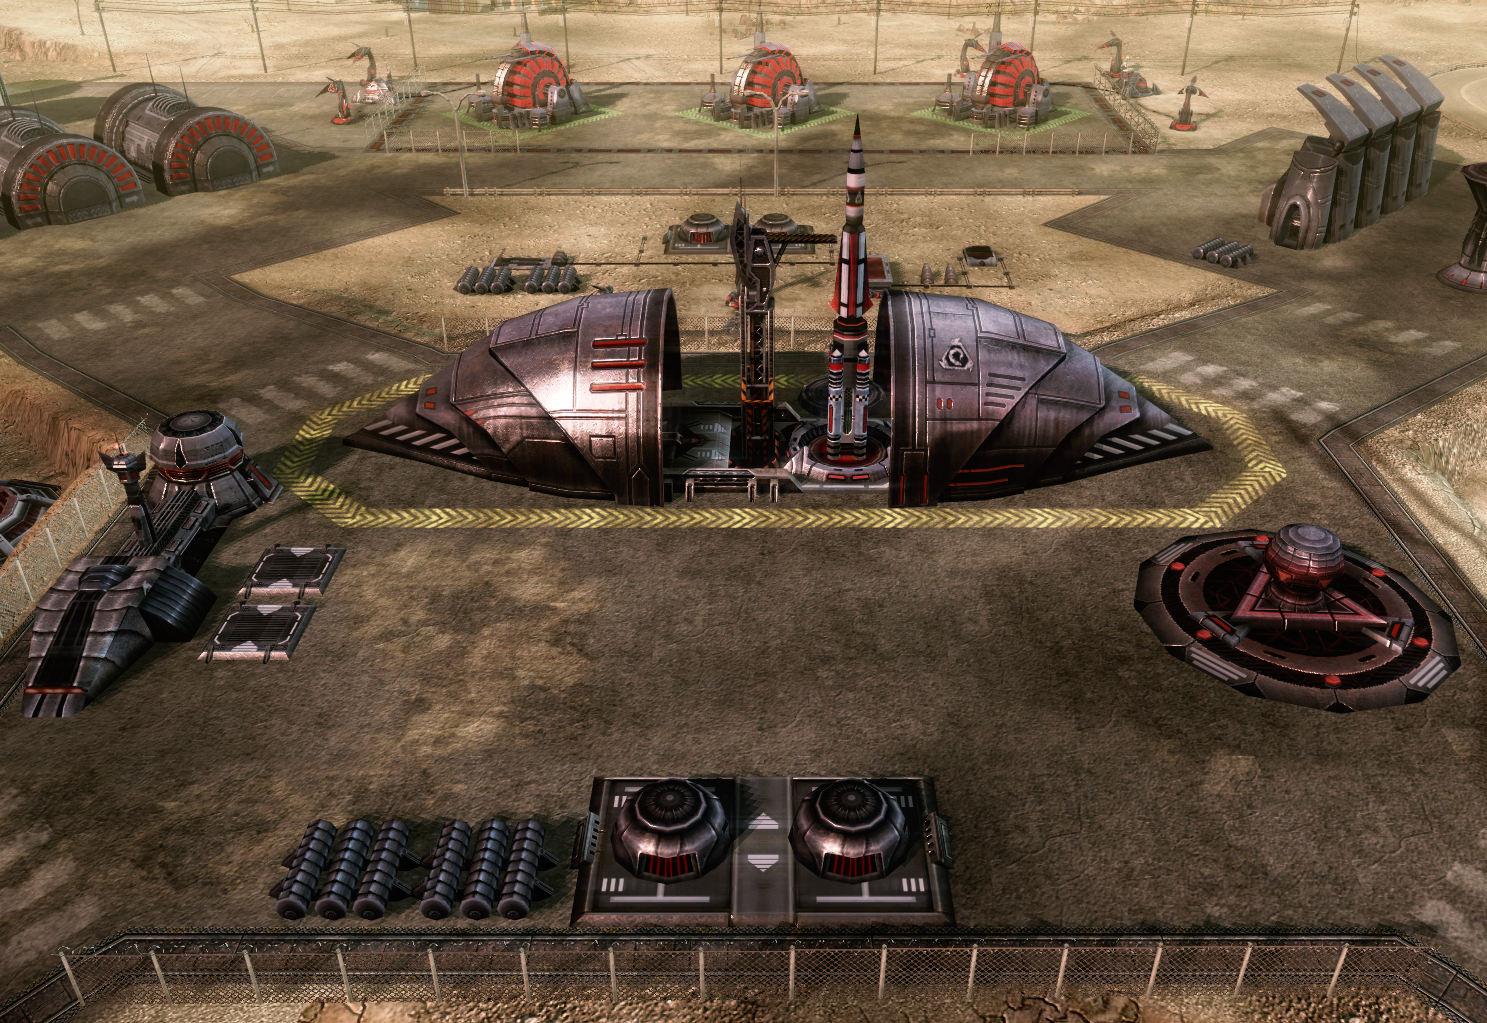 command and conquer 4 walkthrough